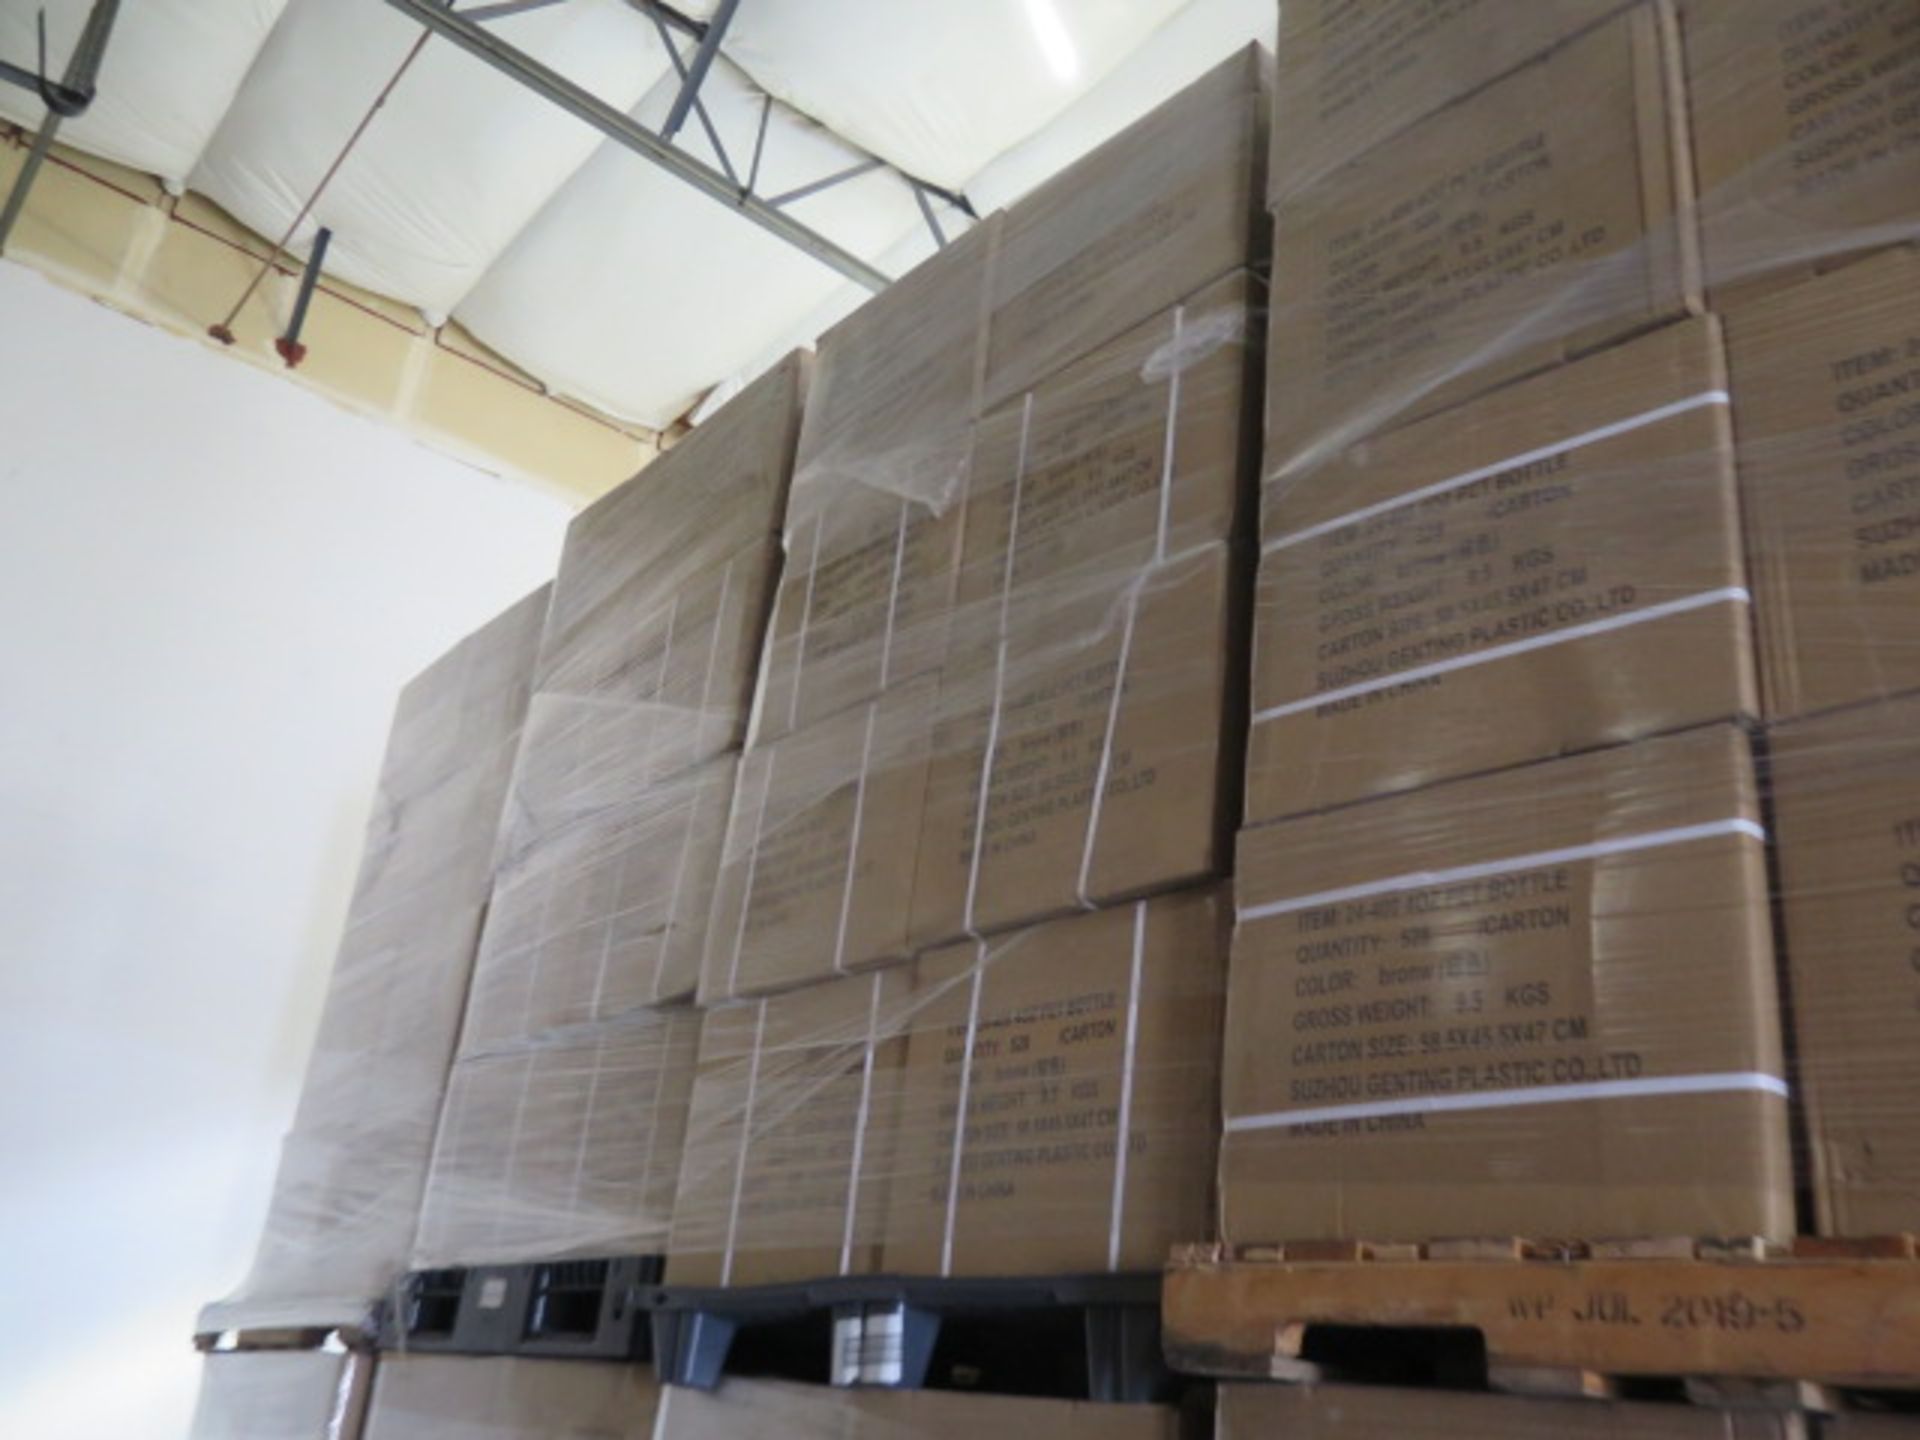 4 oz Brown 24-400 Plastic Bottles (16-Pallets) (Approx 135,000 Bottles) (SOLD AS-IS - NO WARRANTY) - Image 7 of 8